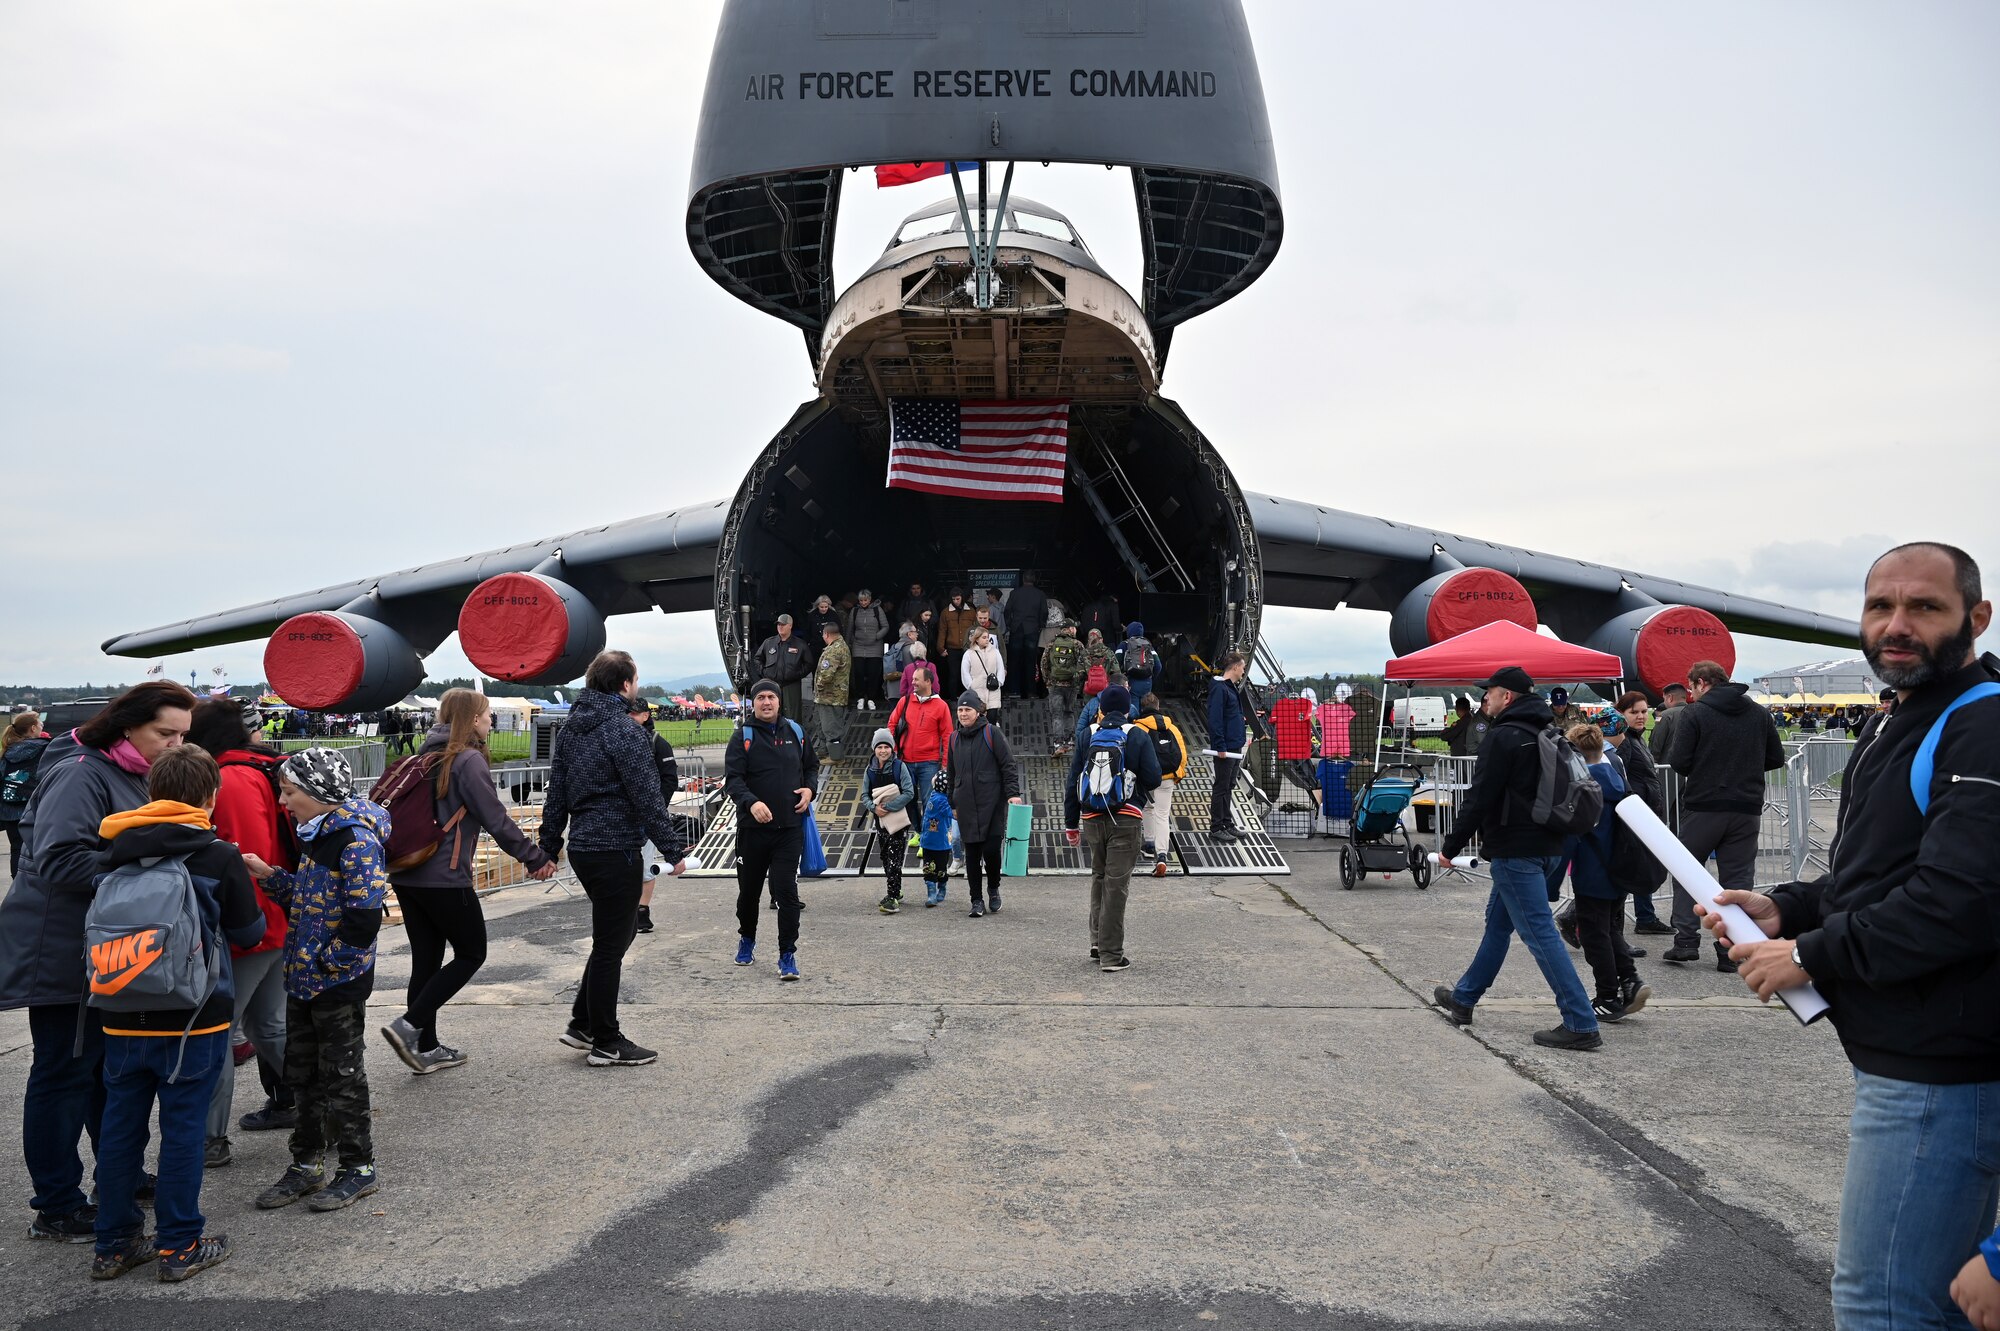 Guests walk through a C-5M Super Galaxy aircraft during the NATO Days air show in Ostrava, Czech Republic, Sept. 17, 2022. More than 110,000 people attended the event over two days. (U.S. Air Force photo by Staff Sgt. Monet Villacorte)